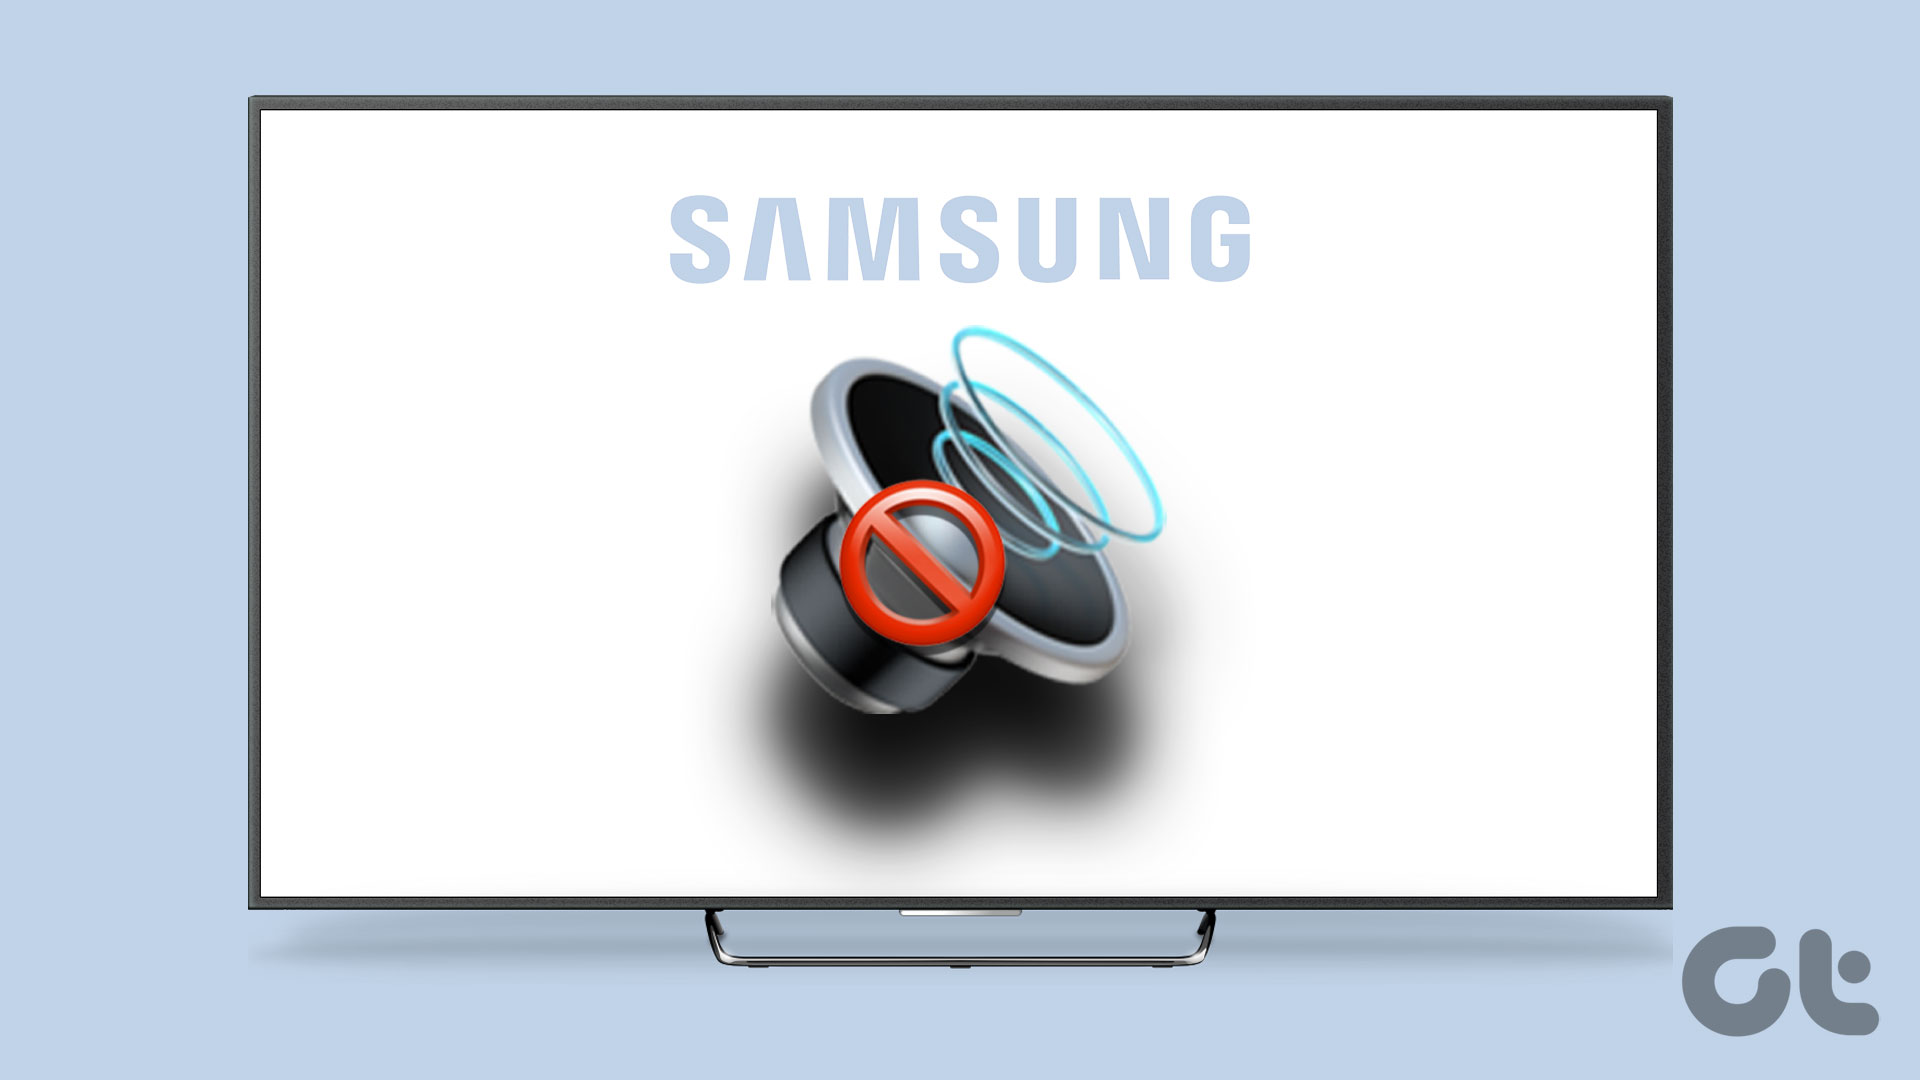 How to Turn off Voice on Samsung TV